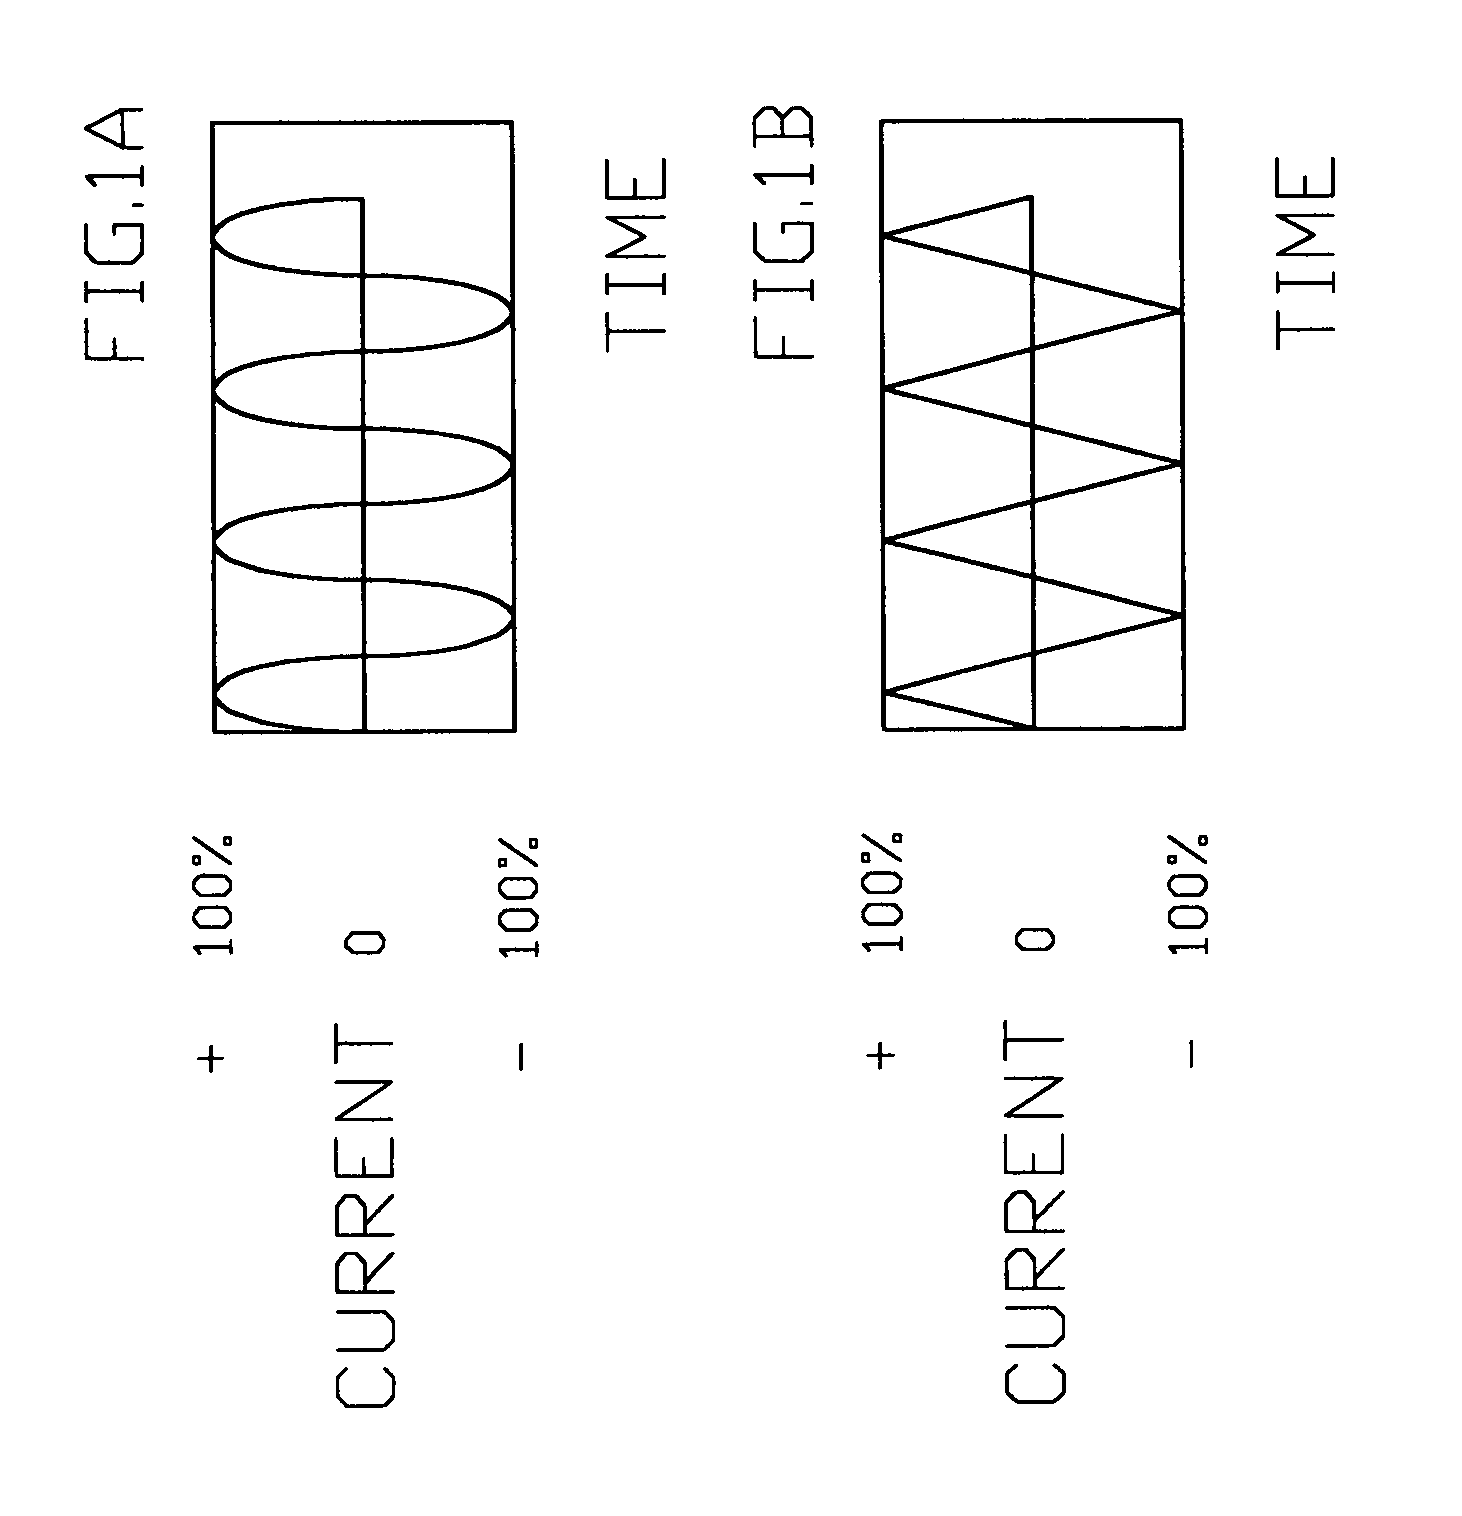 Phase shifted H-Bridge resonant converter with symmetrical currents